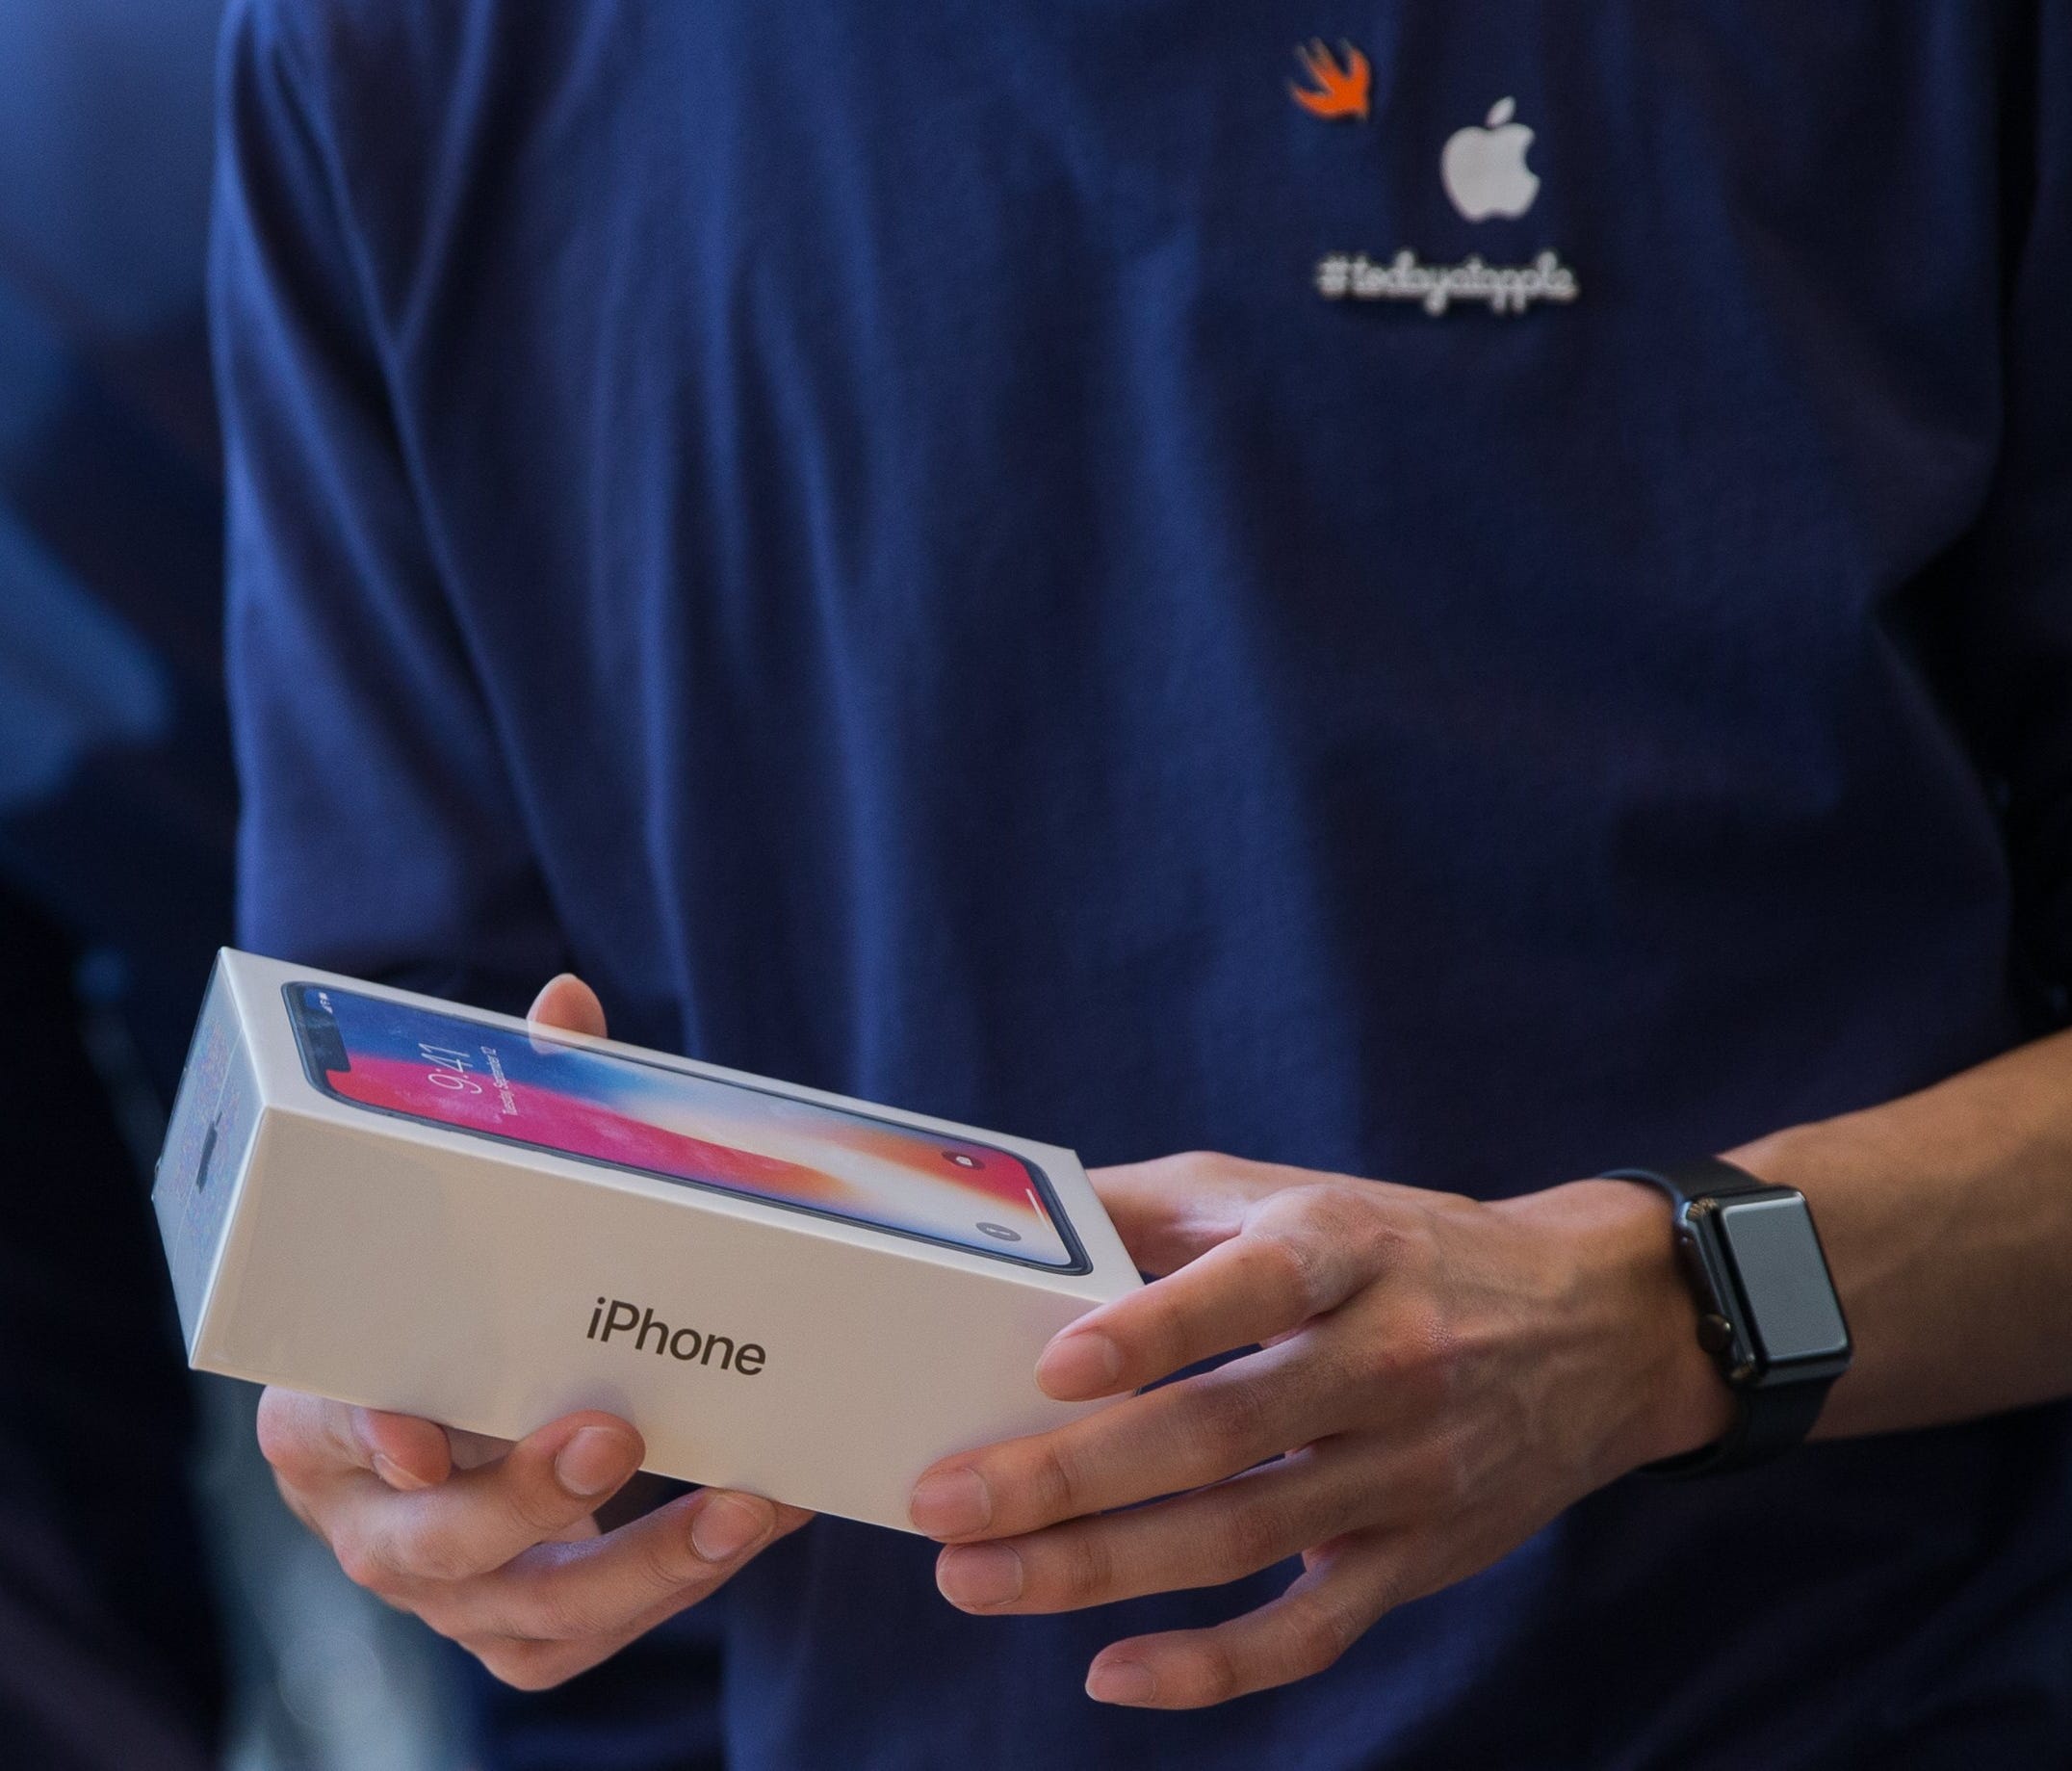 A Apple employee holds the new iPhone X inside the Apple Store in the Omotesando shopping district in Tokyo, Japan.